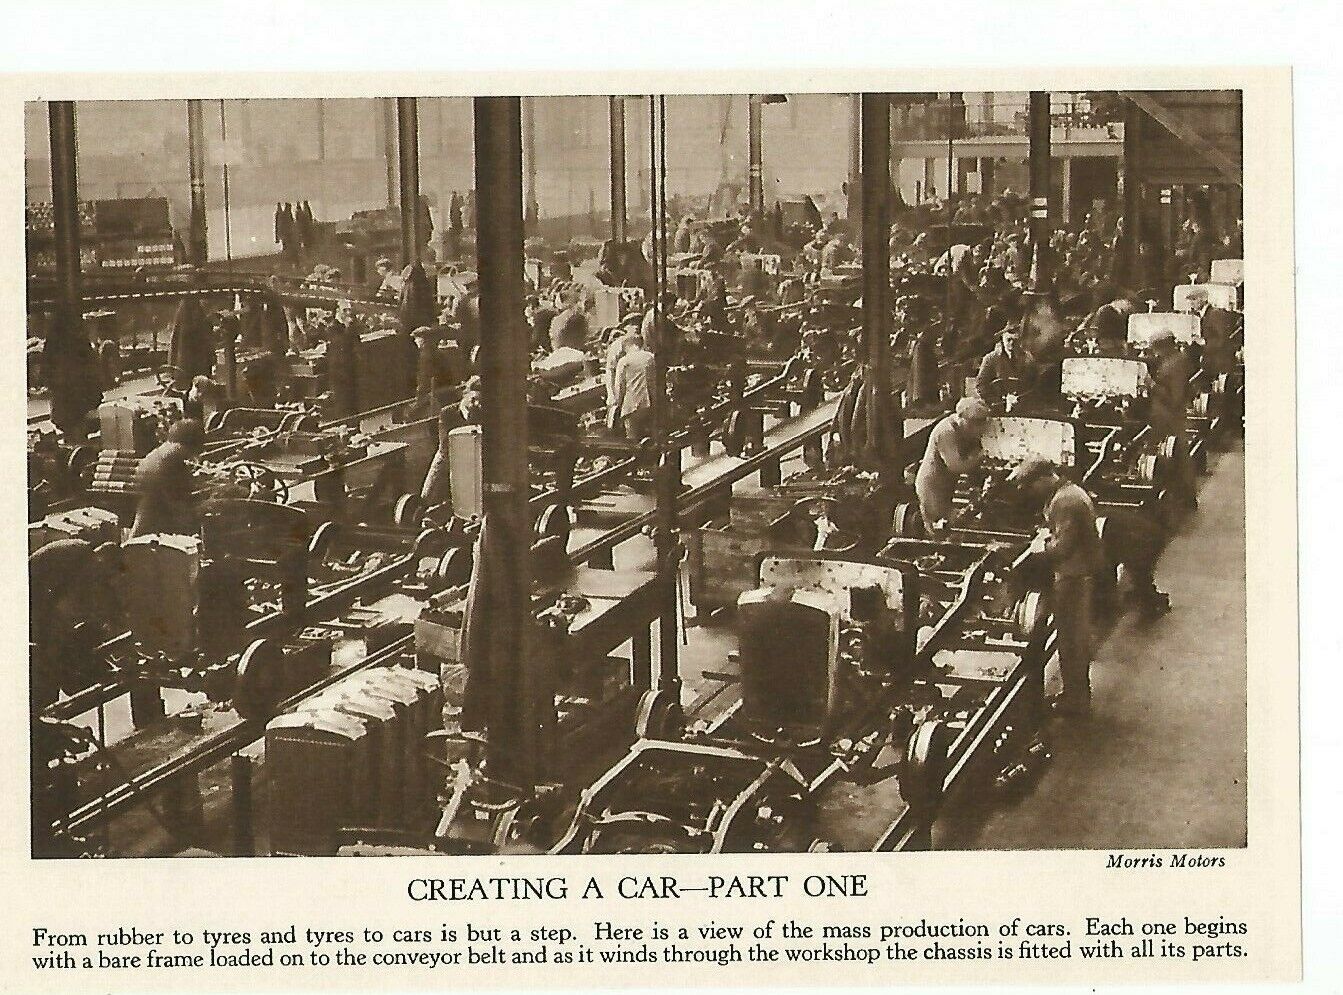 CREATING A CAR PART ONE PRODUCTION LINE CONVEYOR BELT WORKSHOP c 1935 CLIPPING